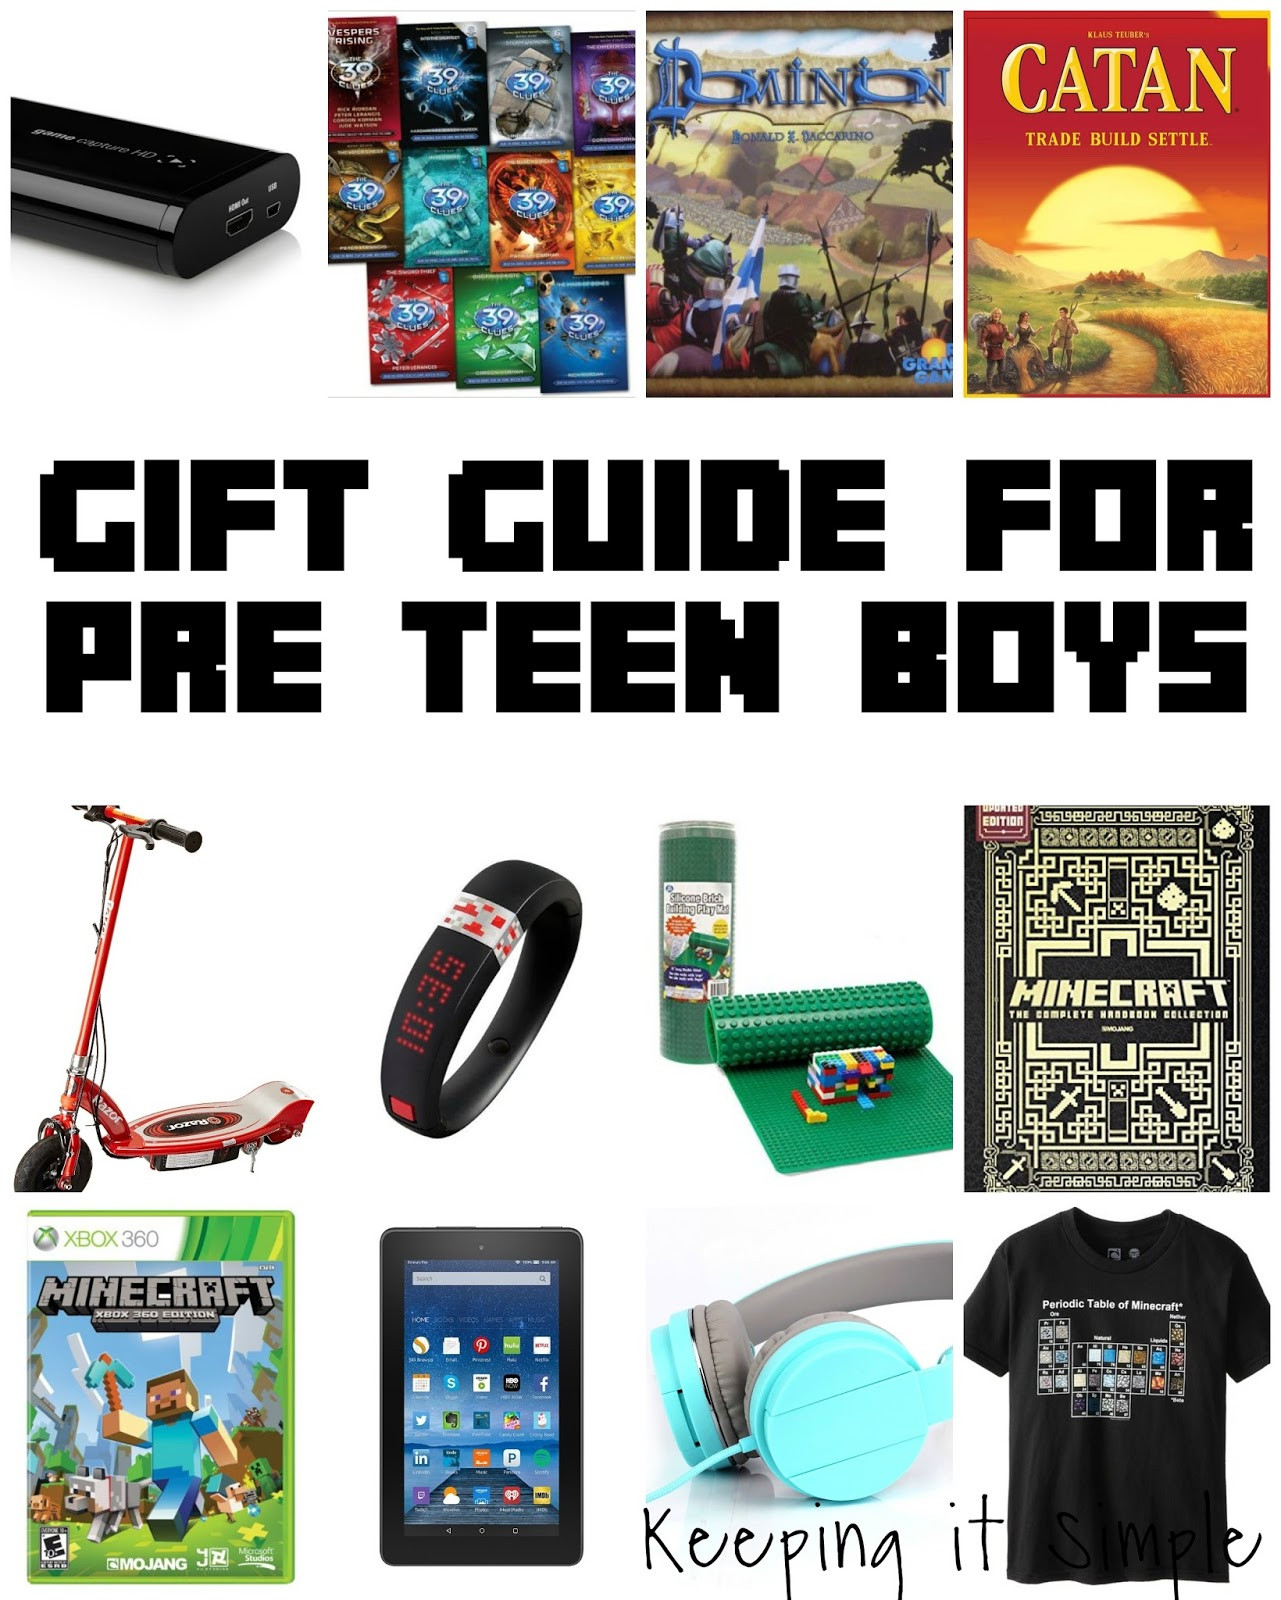 Birthday Gift Ideas For Teenage Guys
 Keeping it Simple Guide Gift for Pre Teen Boys and $100